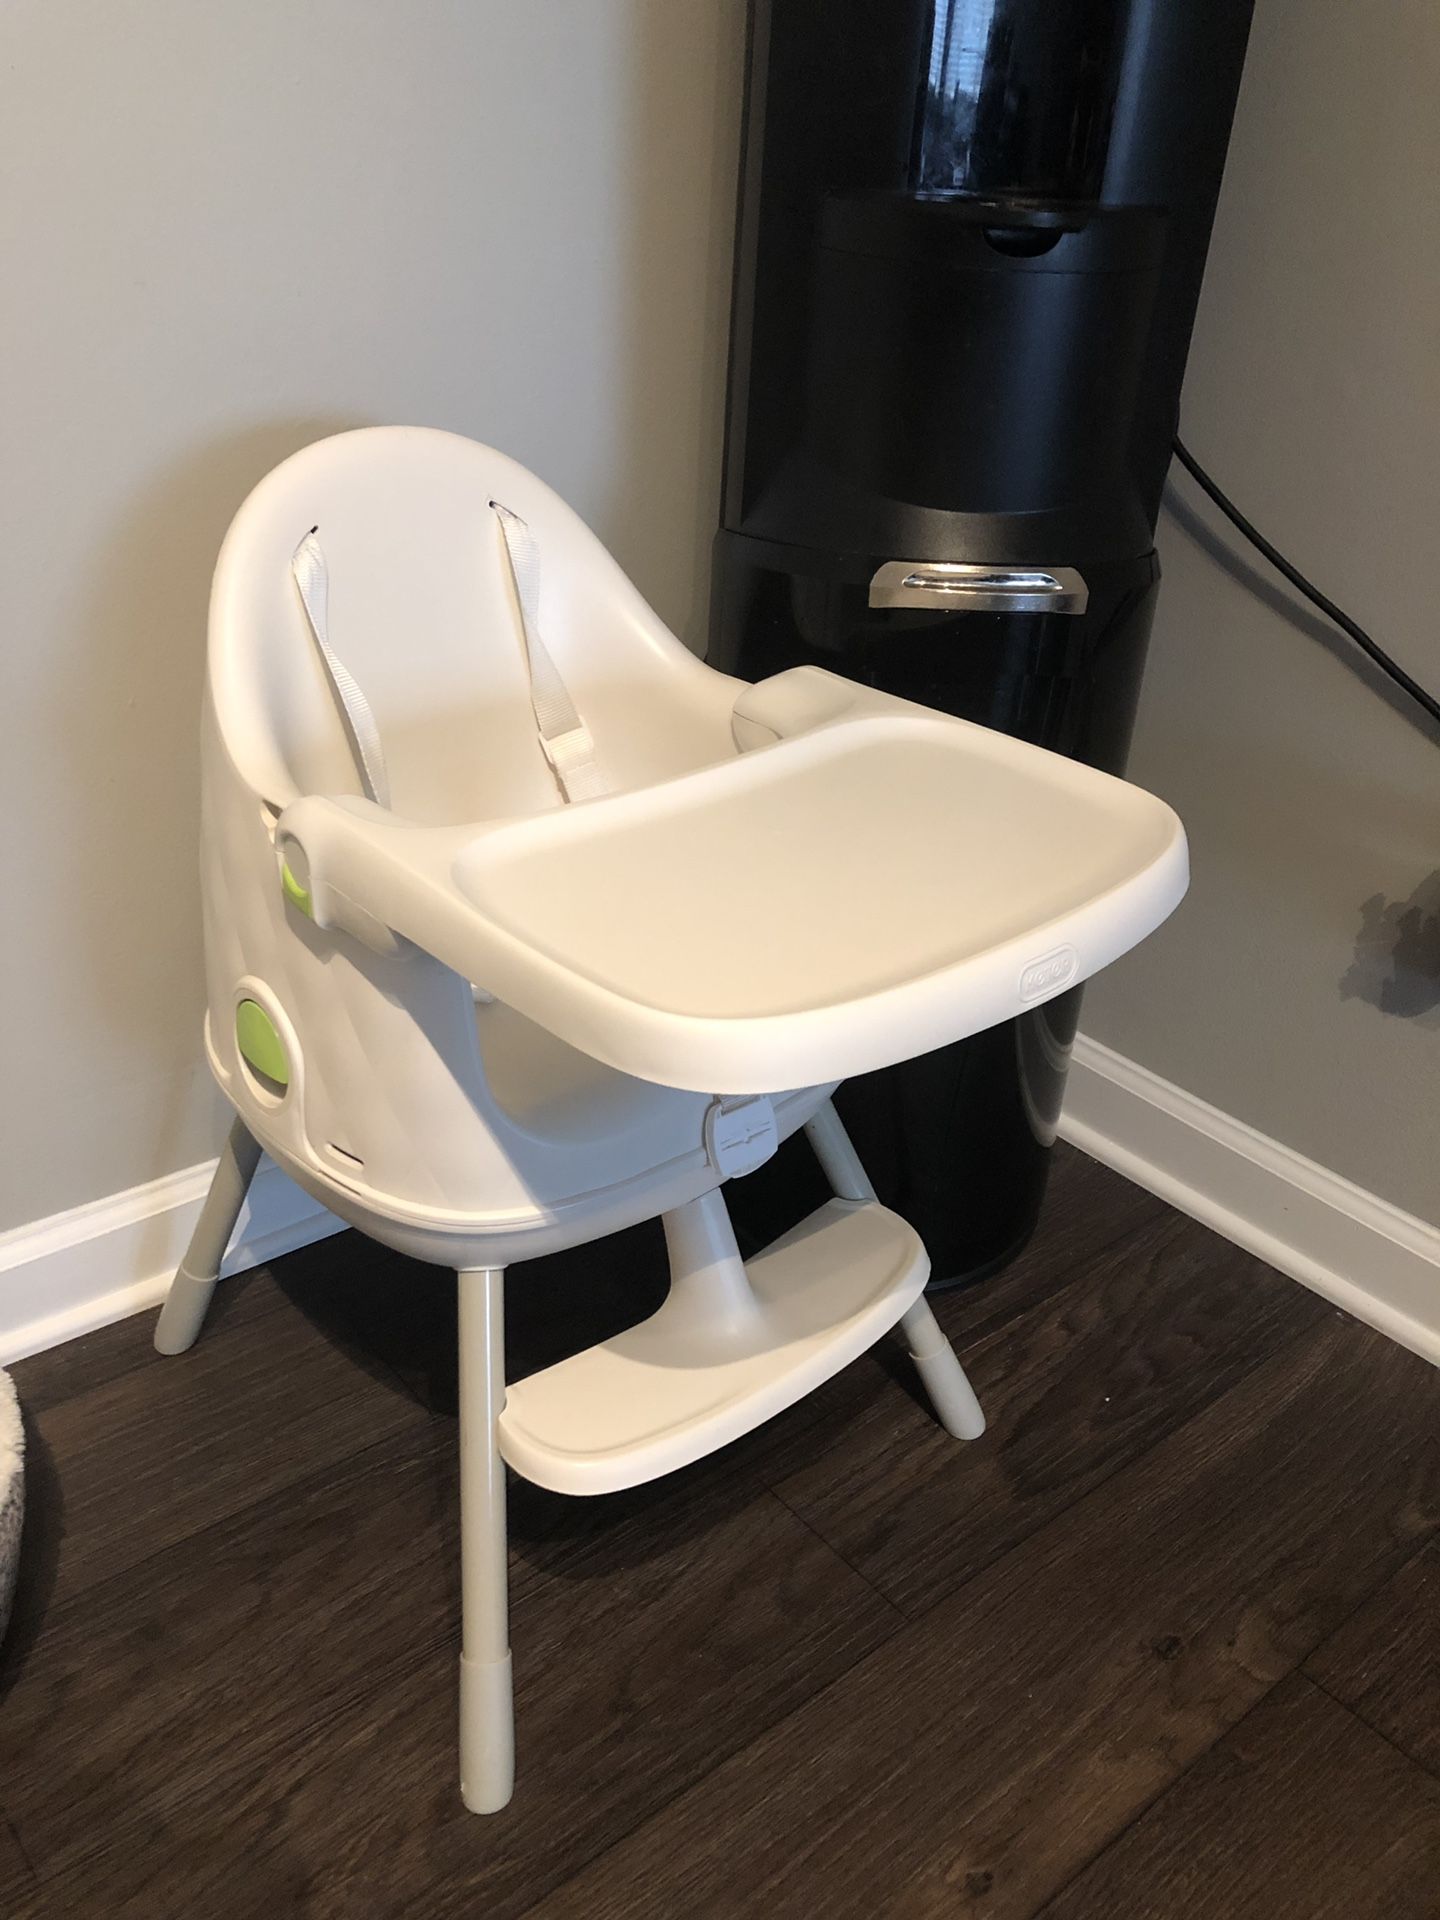 Keter 3-in-1 Multi-Dine Convertible High Chair/Booster Seat/Junior Seat, White